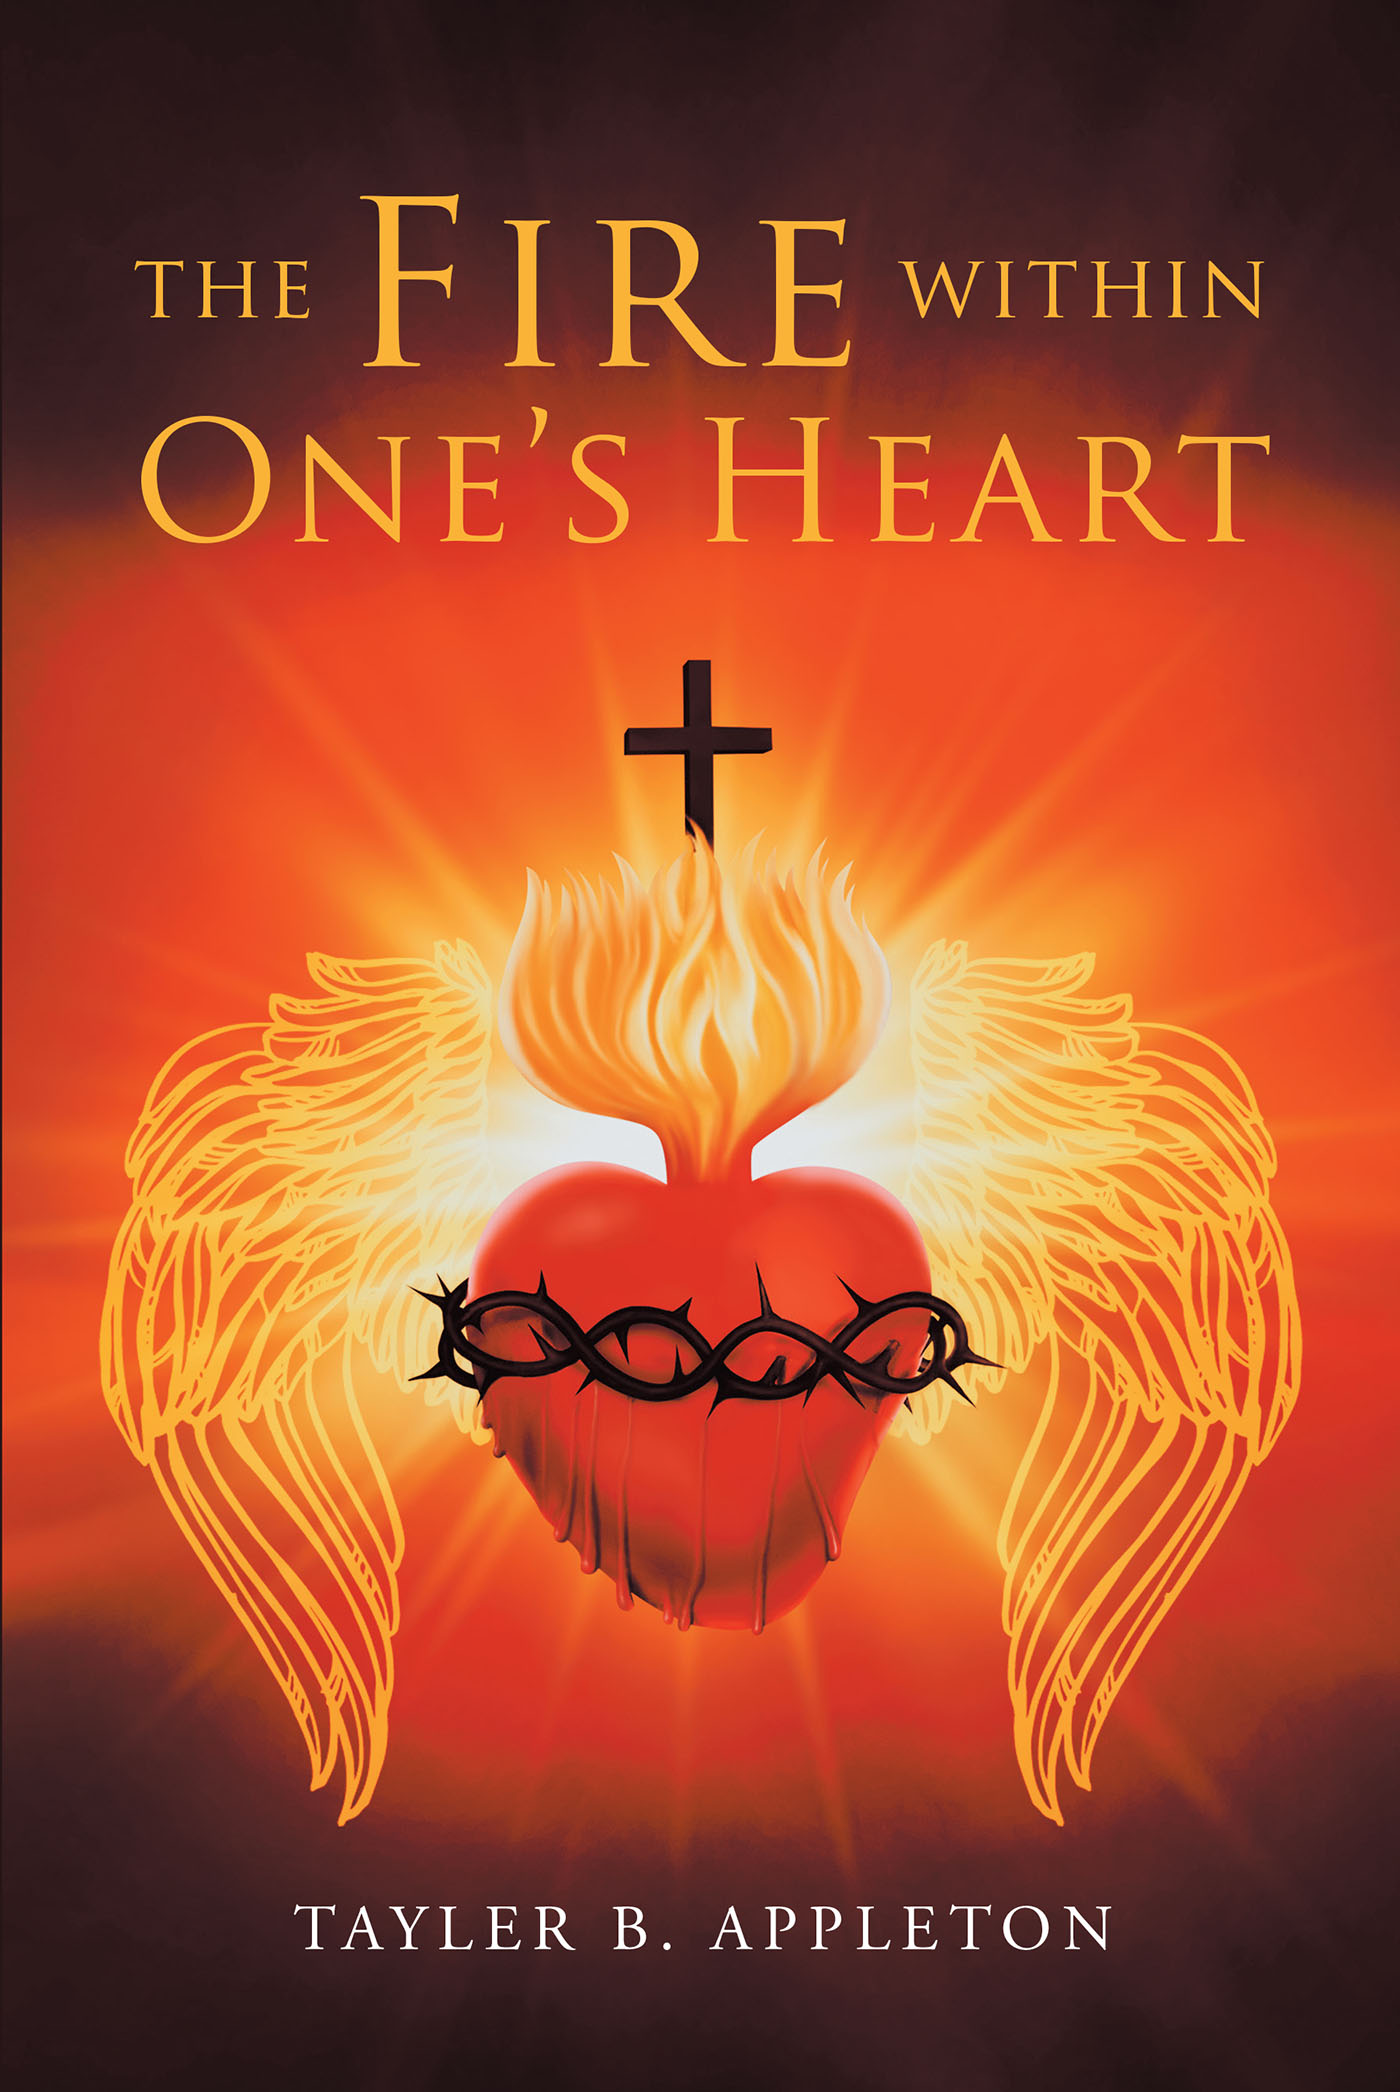 Tayler B. Appleton’s Newly Released "The Fire within One’s Heart" is a Thoughtful Collection of Biblical Analysis and Reflections Meant to Inspire